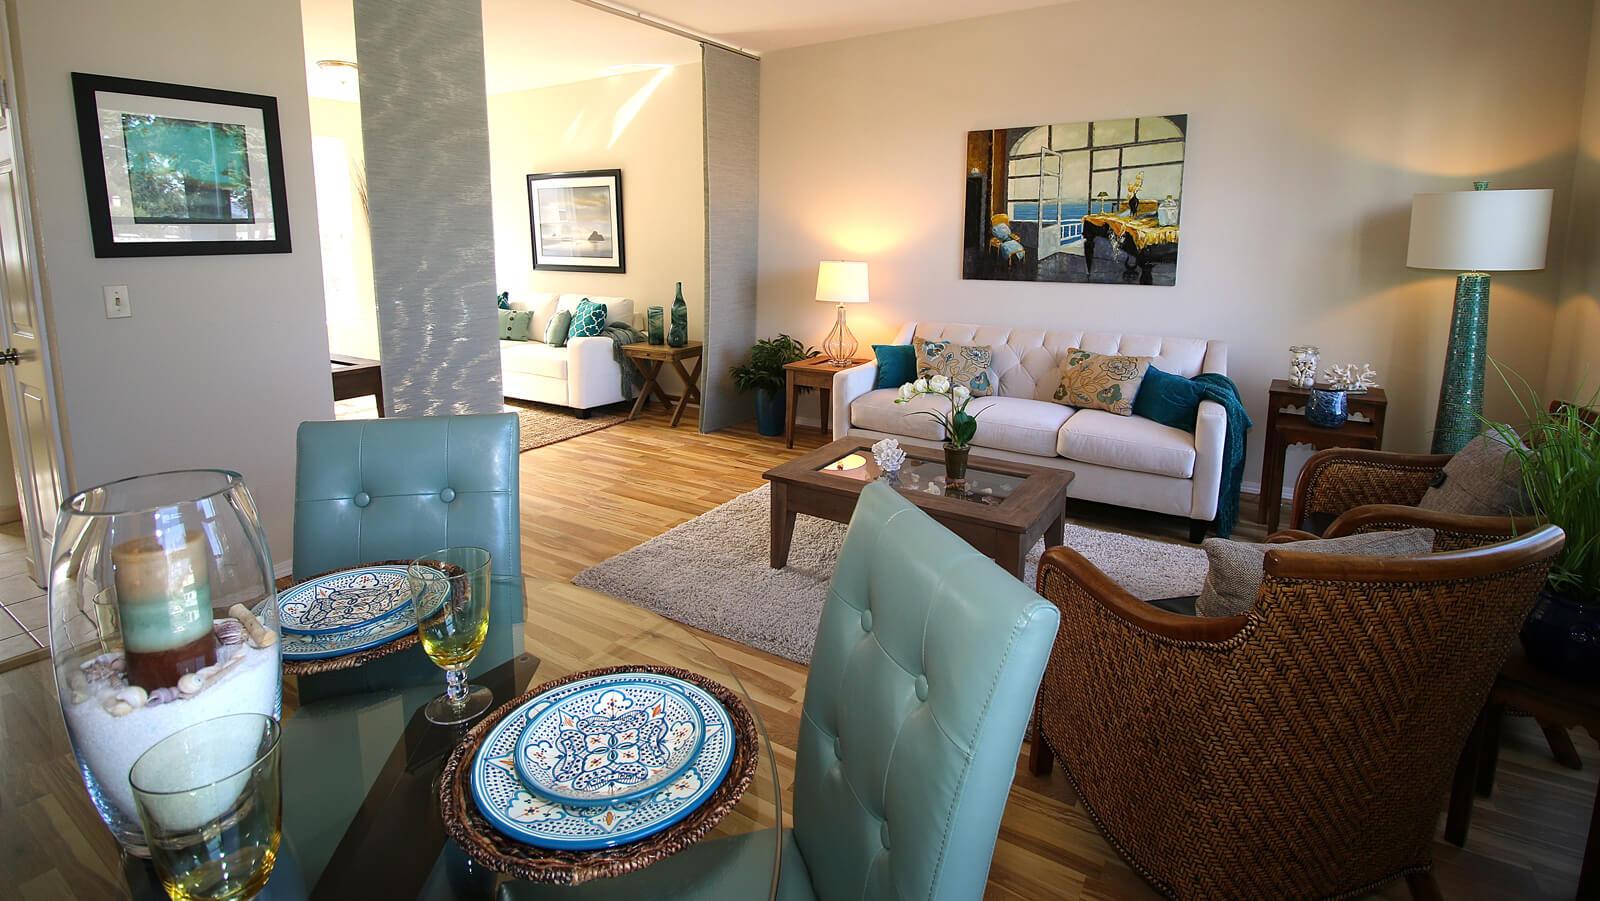 A condo in Santa Cruz, CA, Staged by Limelight Home Staging